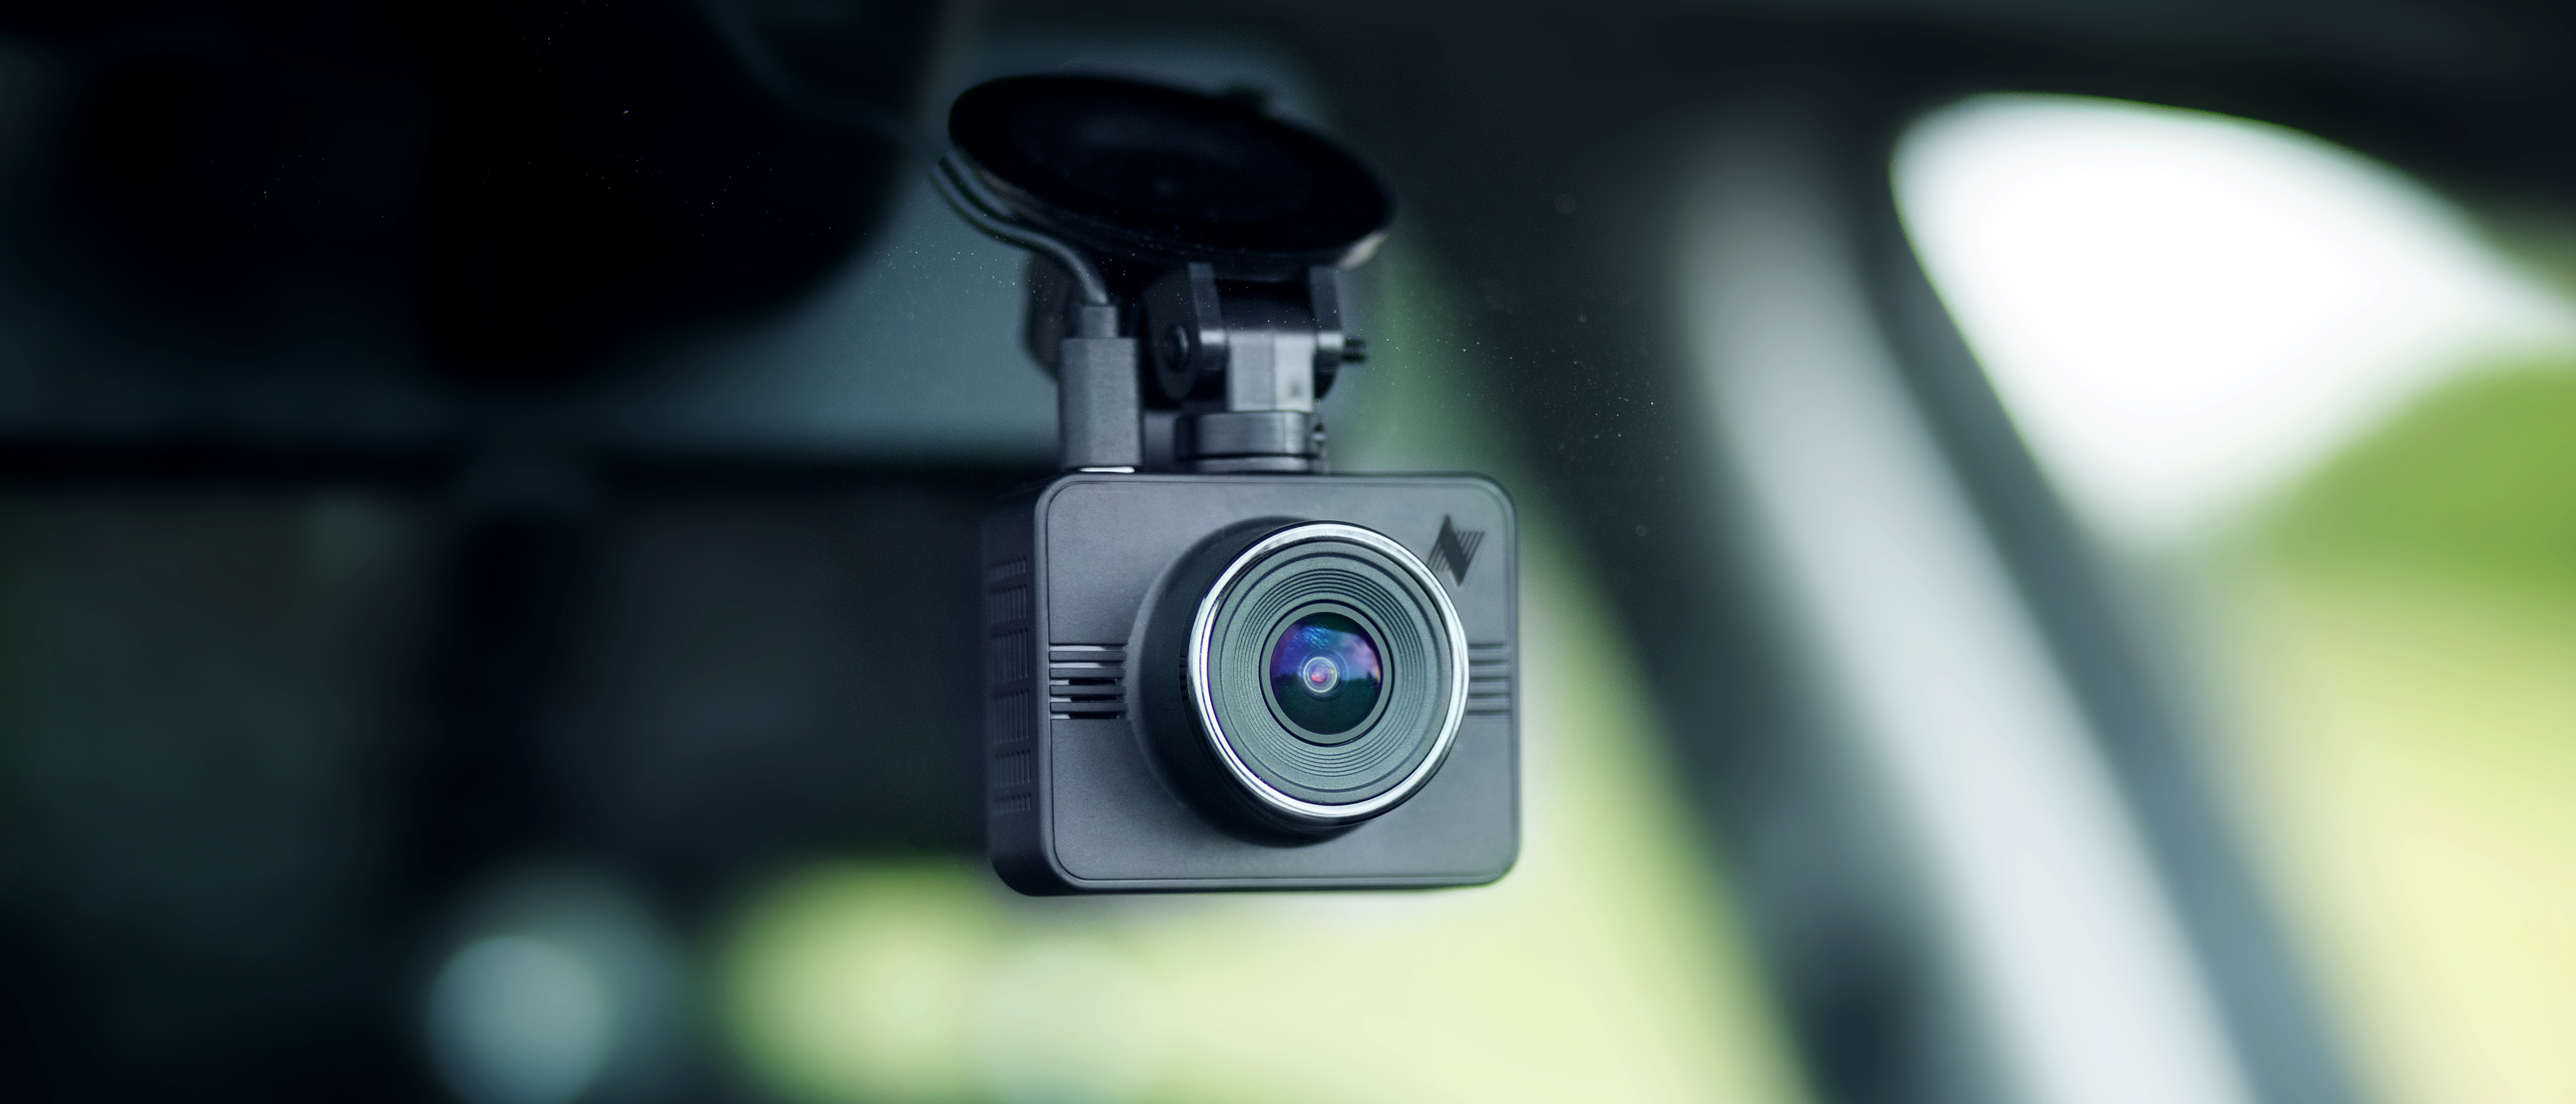 Nexar's dashcam app is free, but at the cost of your data